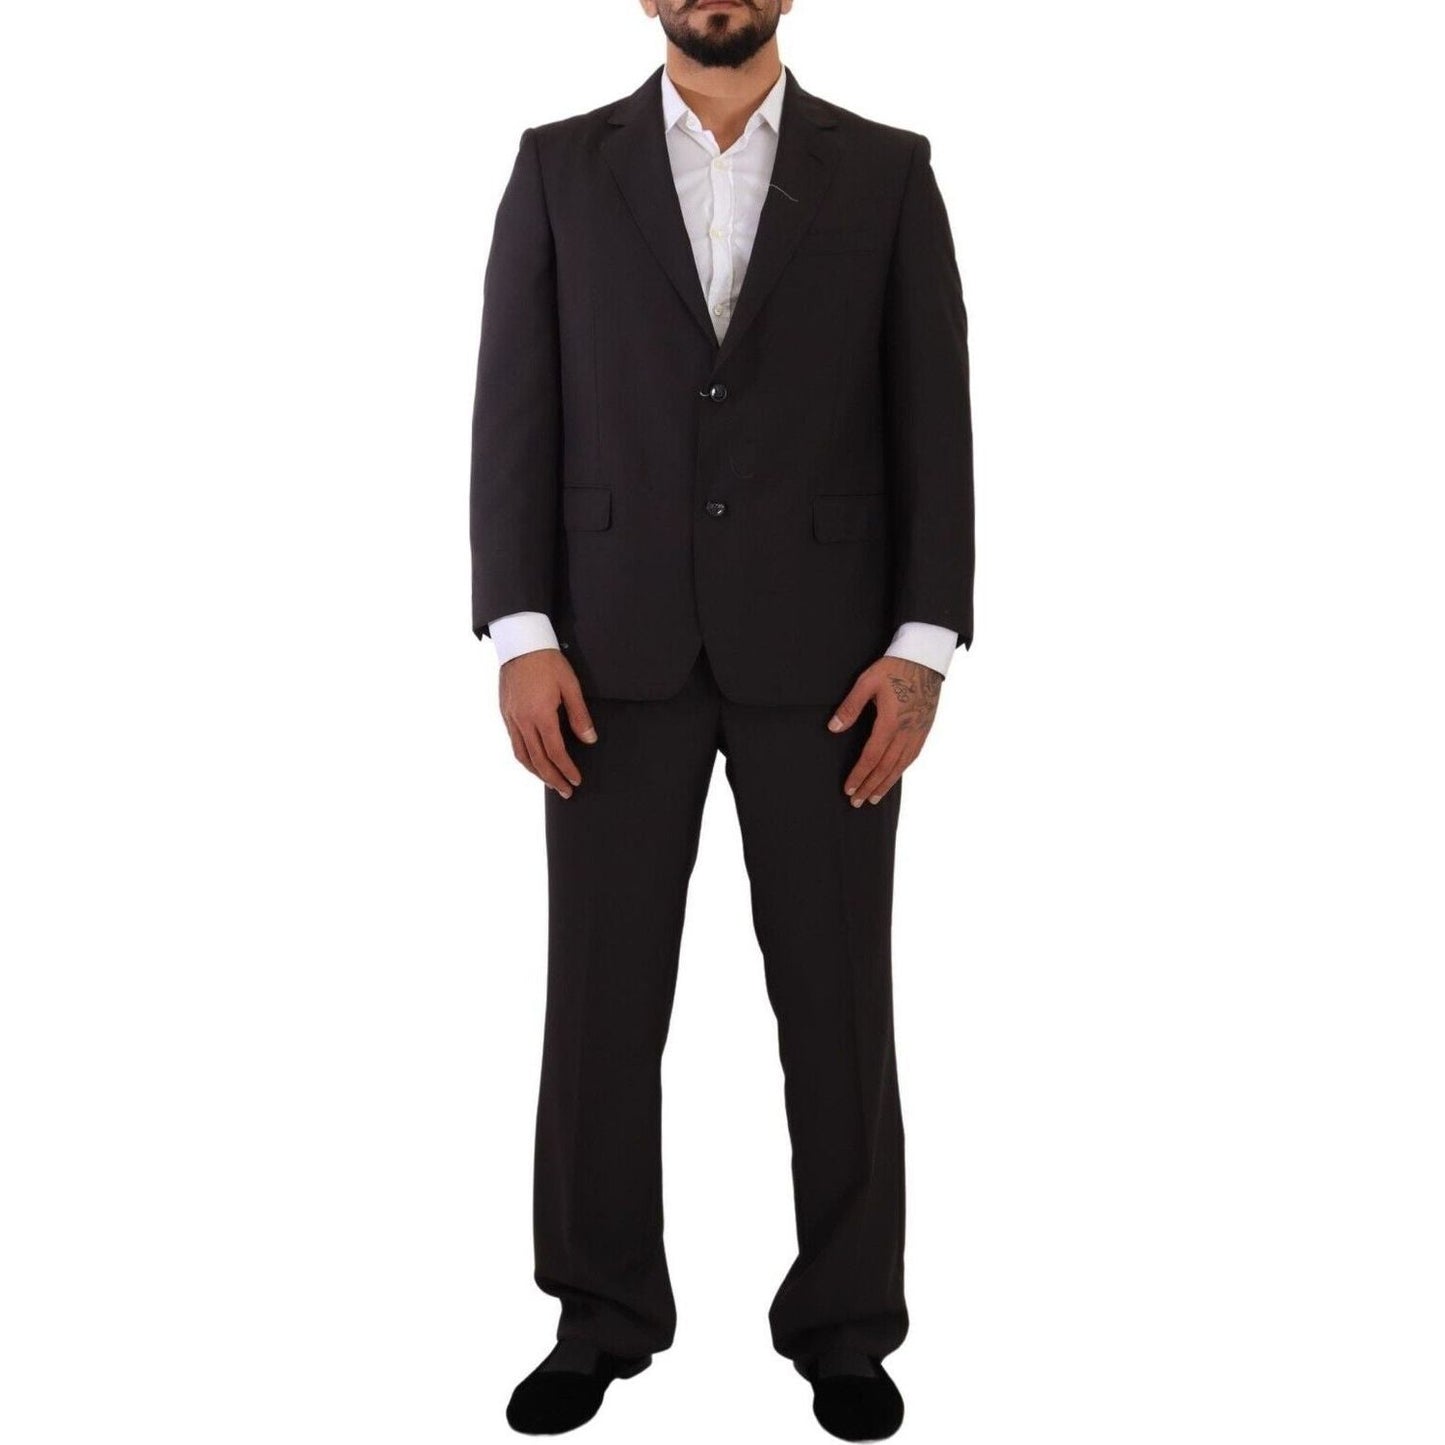 Domenico Tagliente Sleek Grey 2-Piece Mens Suit with Notch Lapels gray-polyester-single-breasted-formal-suit-1 s-l1600-19-4-75fc1abd-3e5.jpg